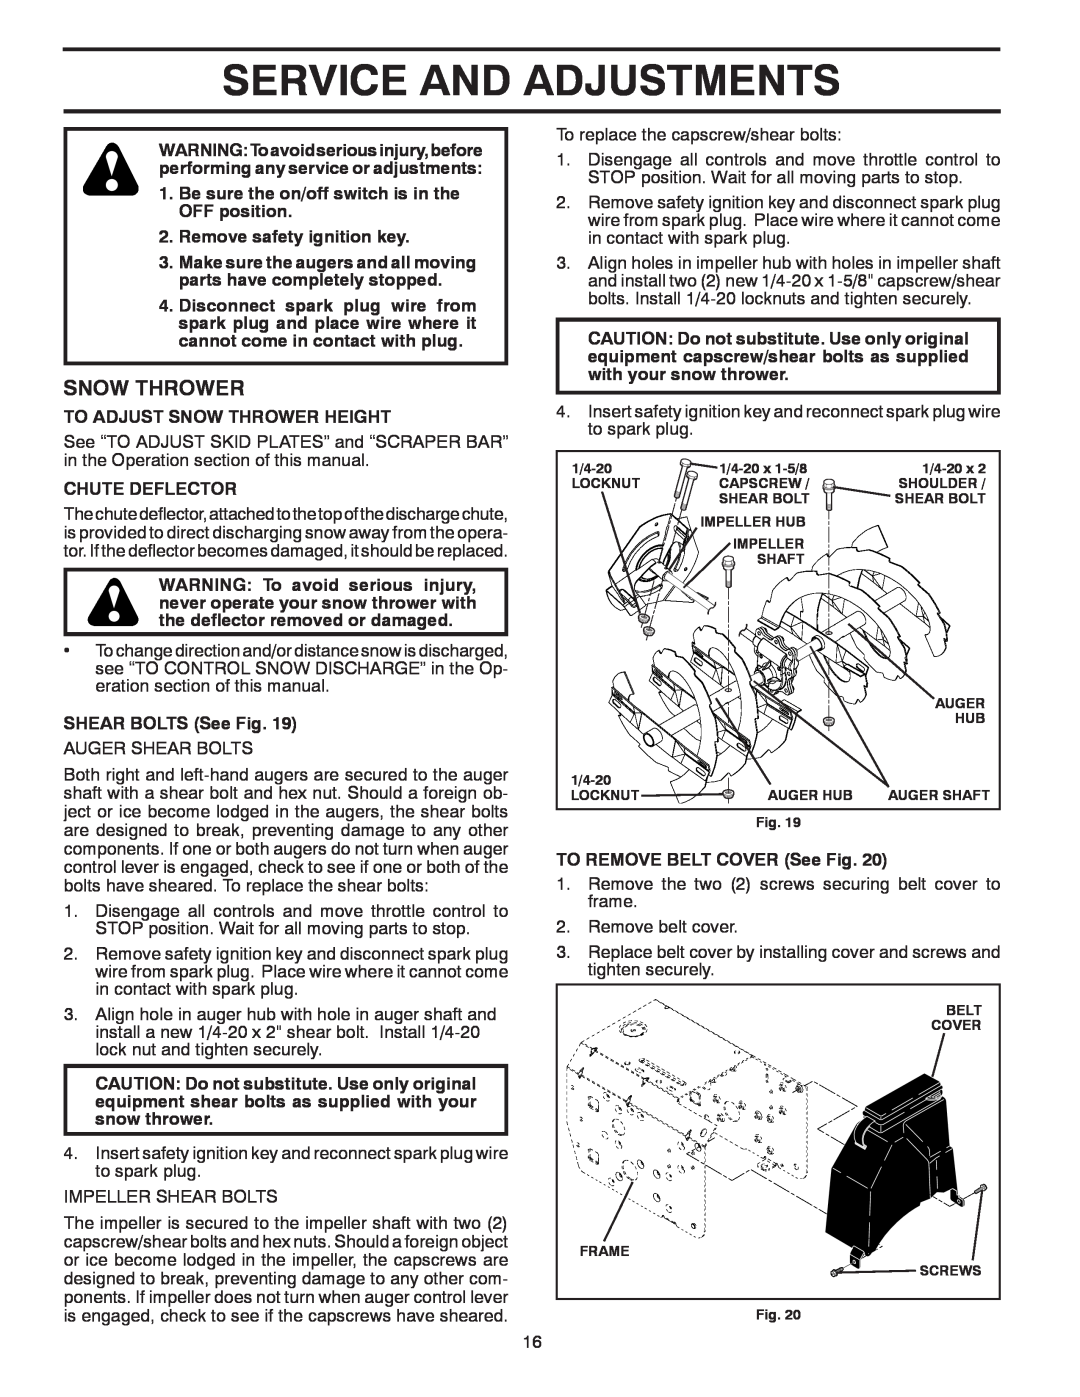 Poulan 96198003600, 435564, PP291E27 owner manual Service And Adjustments, Snow Thrower 